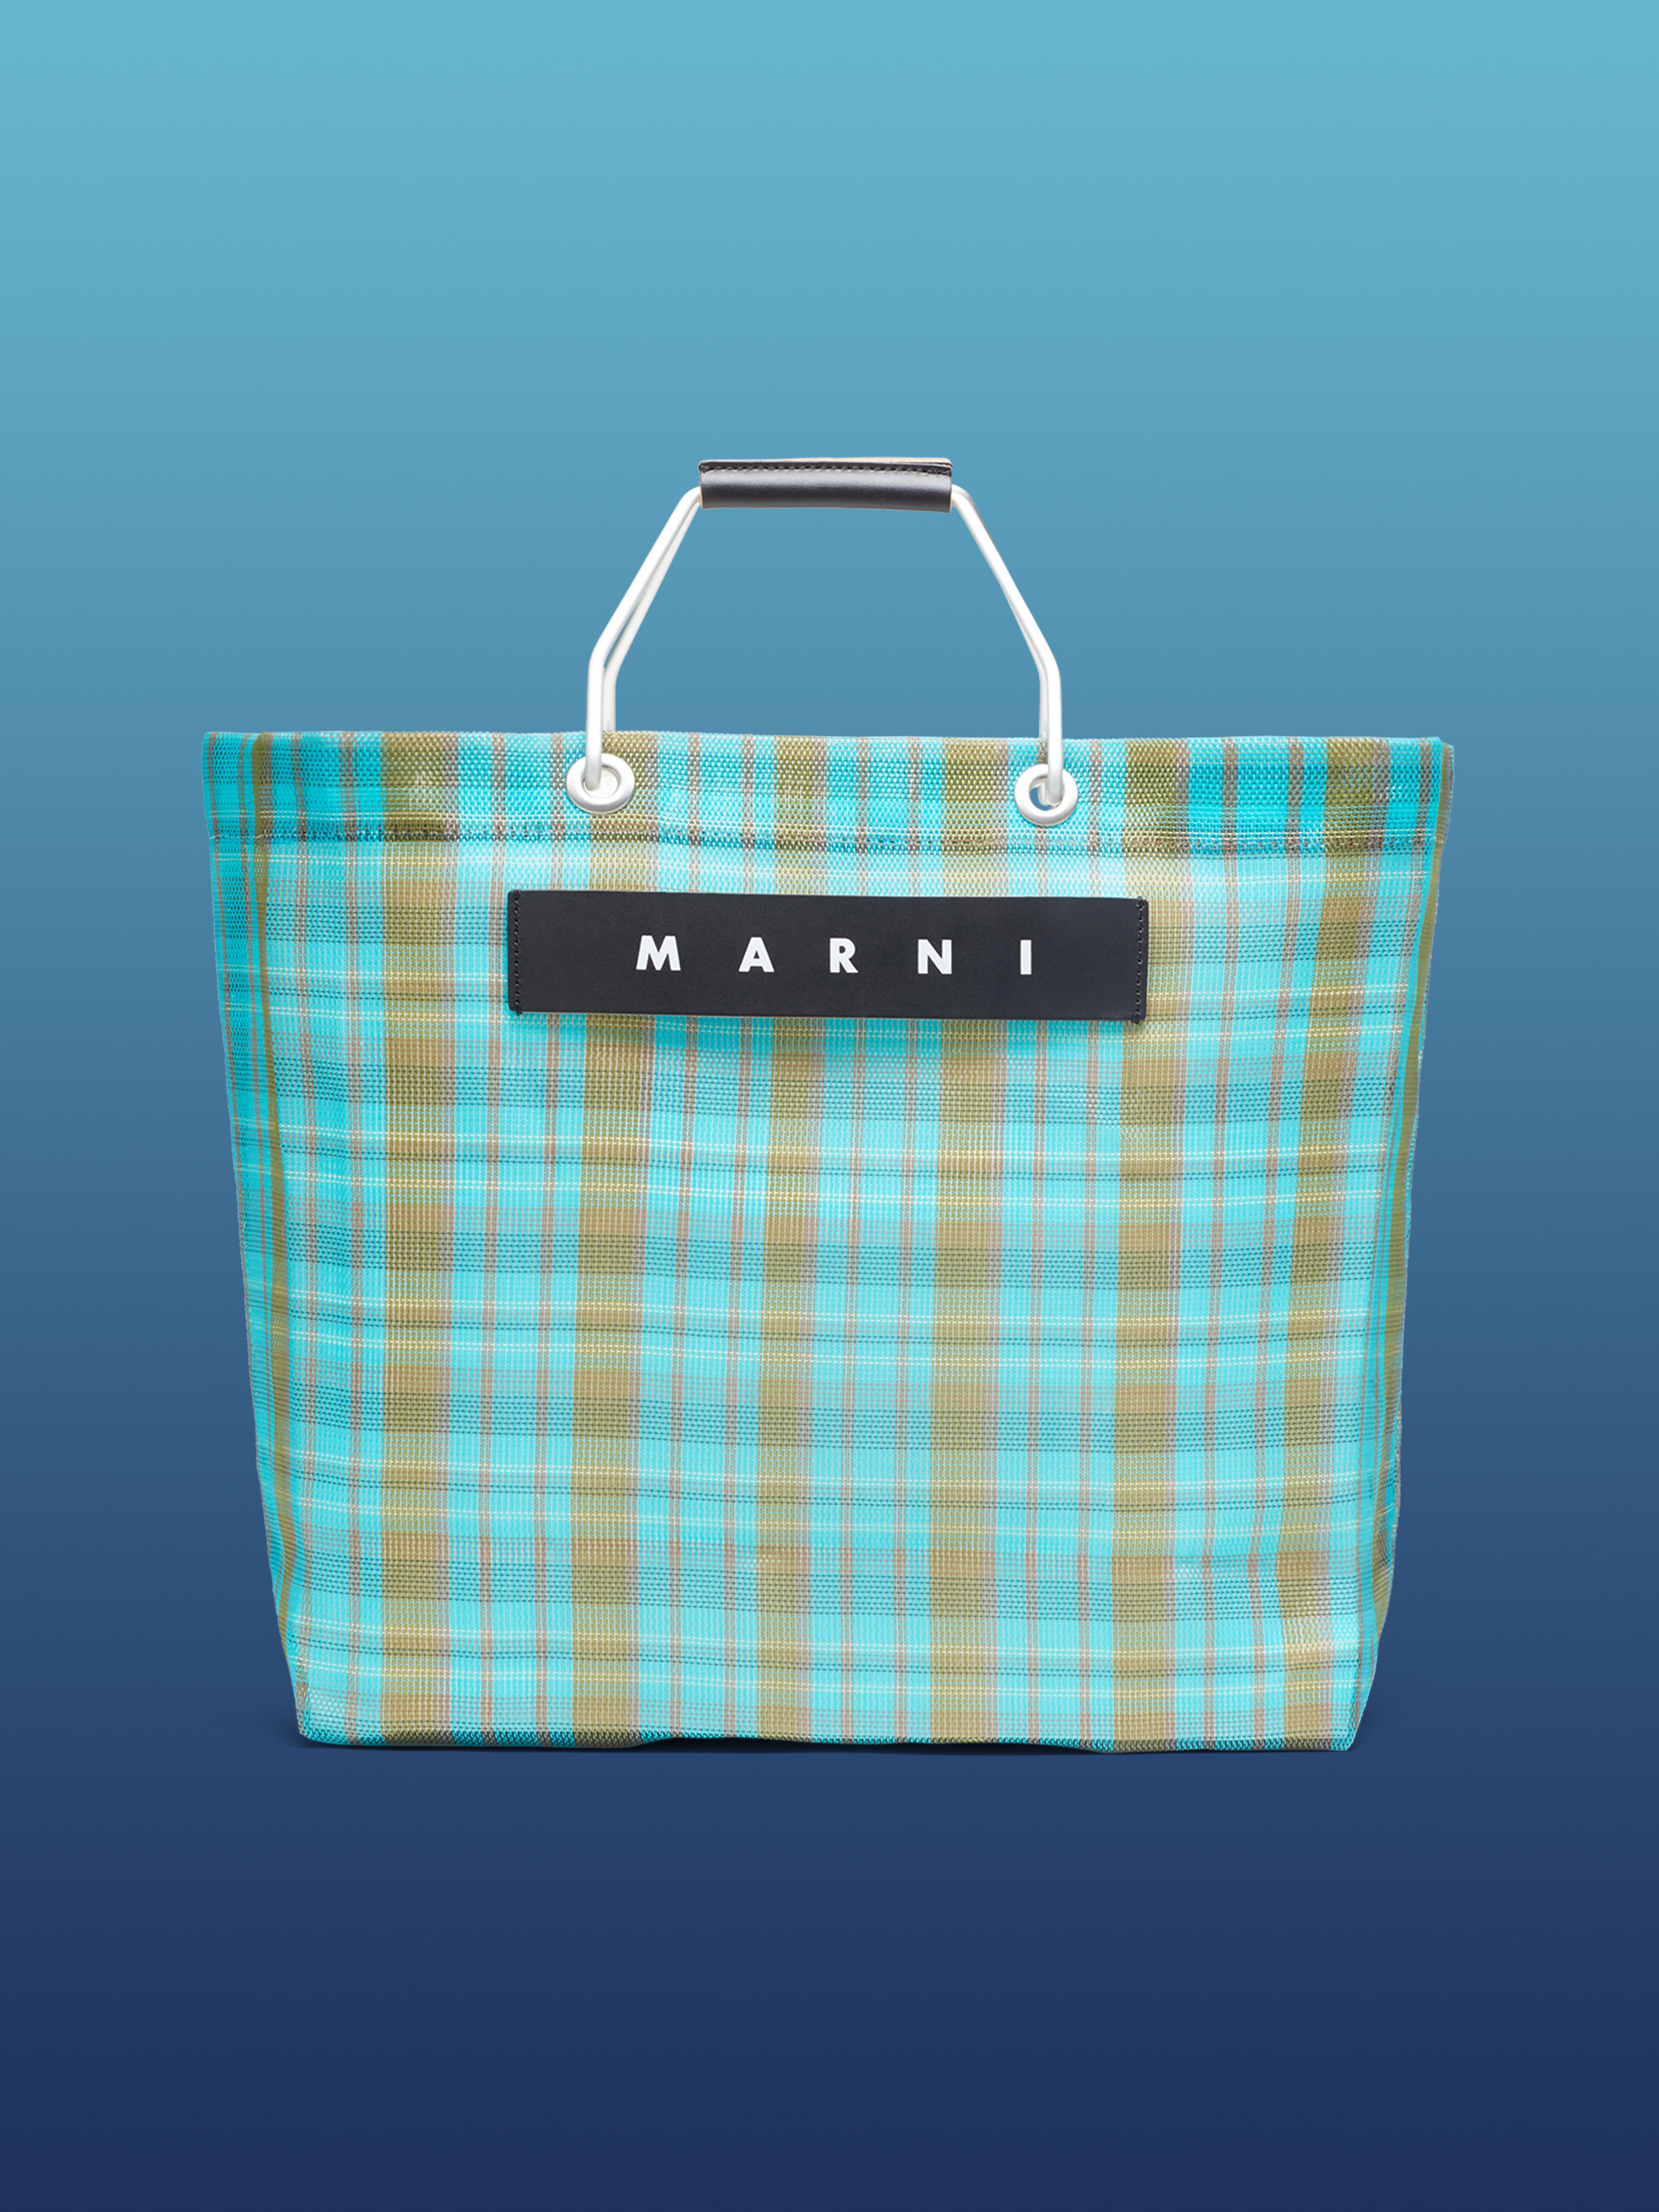 MARNI MARKET bag in pale blue and green - Bags - Image 1